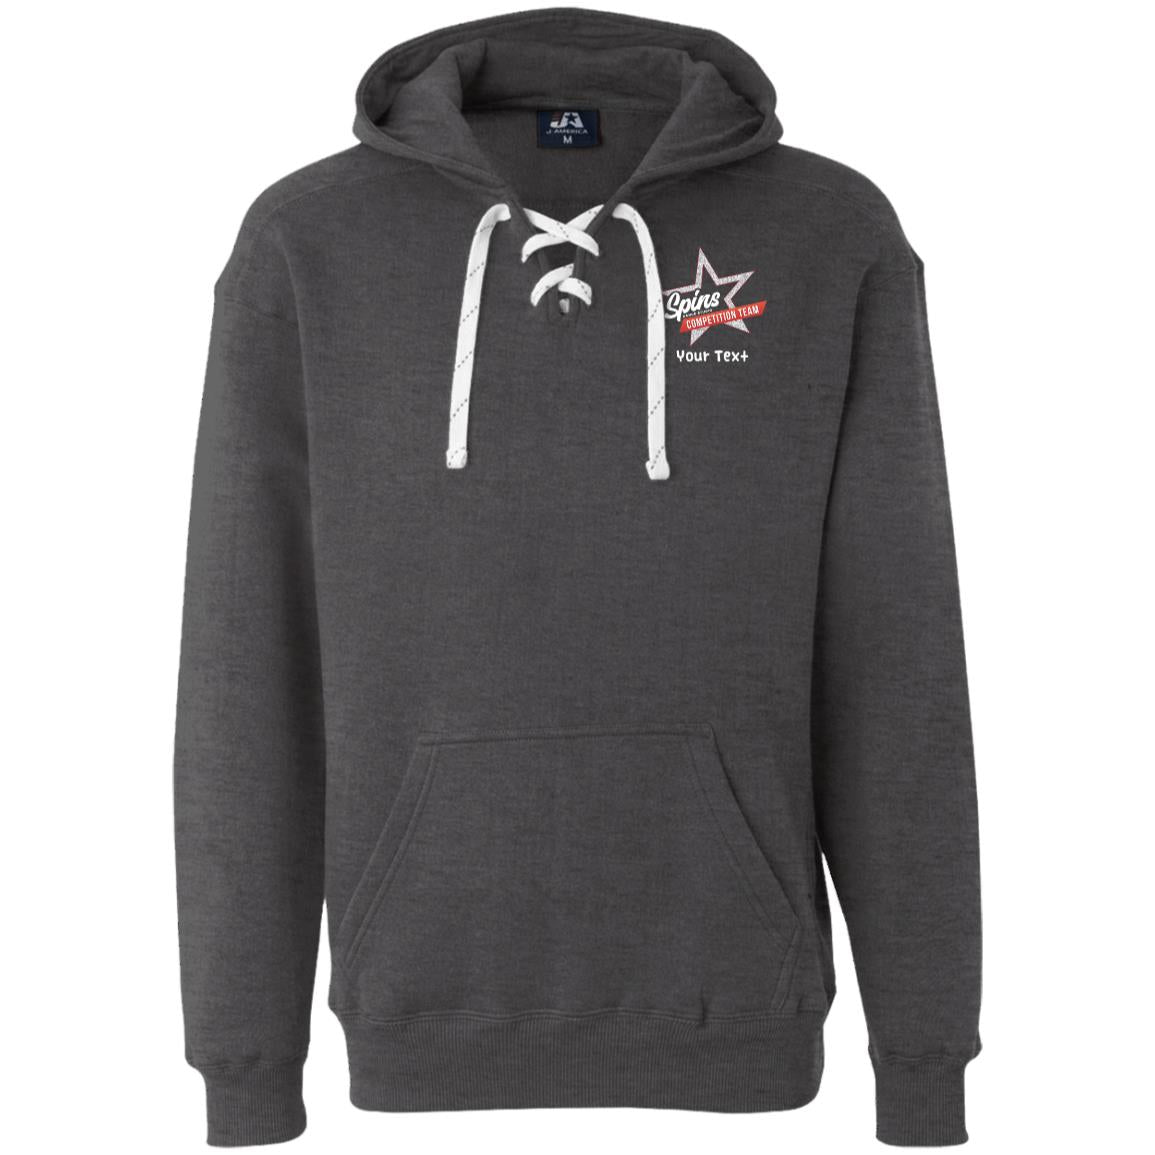 Spins Competition Team Heavyweight Sport Lace Hoodie - With Personalization